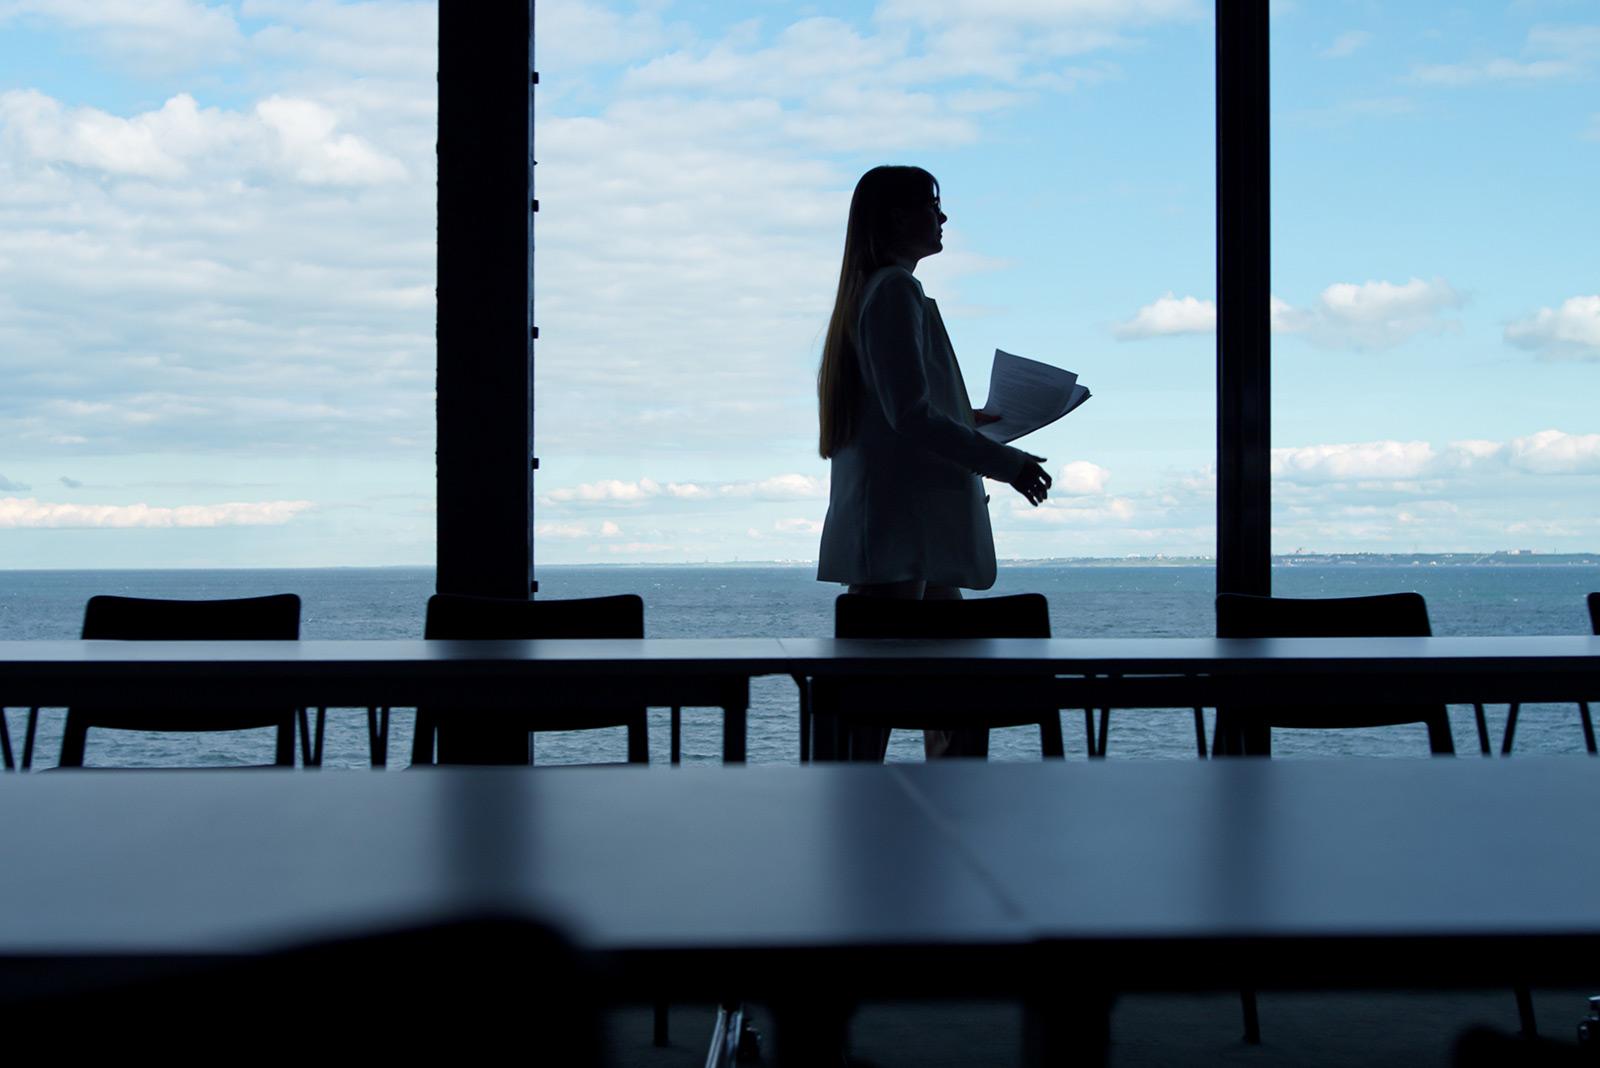 Woman in an empty meeting room with a view of a body of water